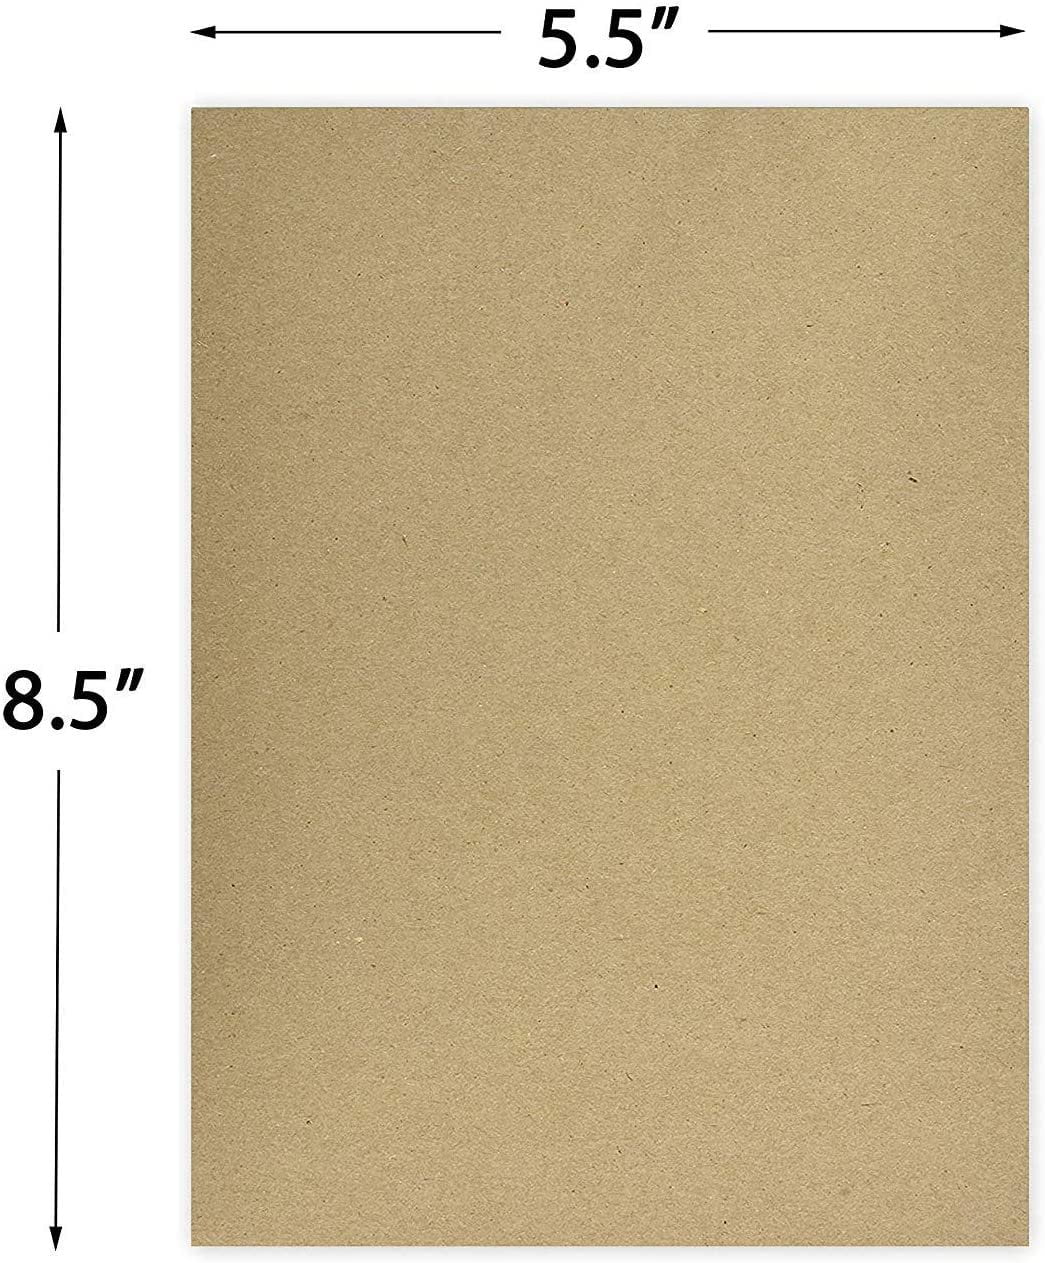 25 Chipboard Sheets – 8 x 10 Brown Kraft Cardboard – Medium Weight 30Pt  (.030 Caliper Thickness) Paper Board | Great for Arts & Crafts, Packaging